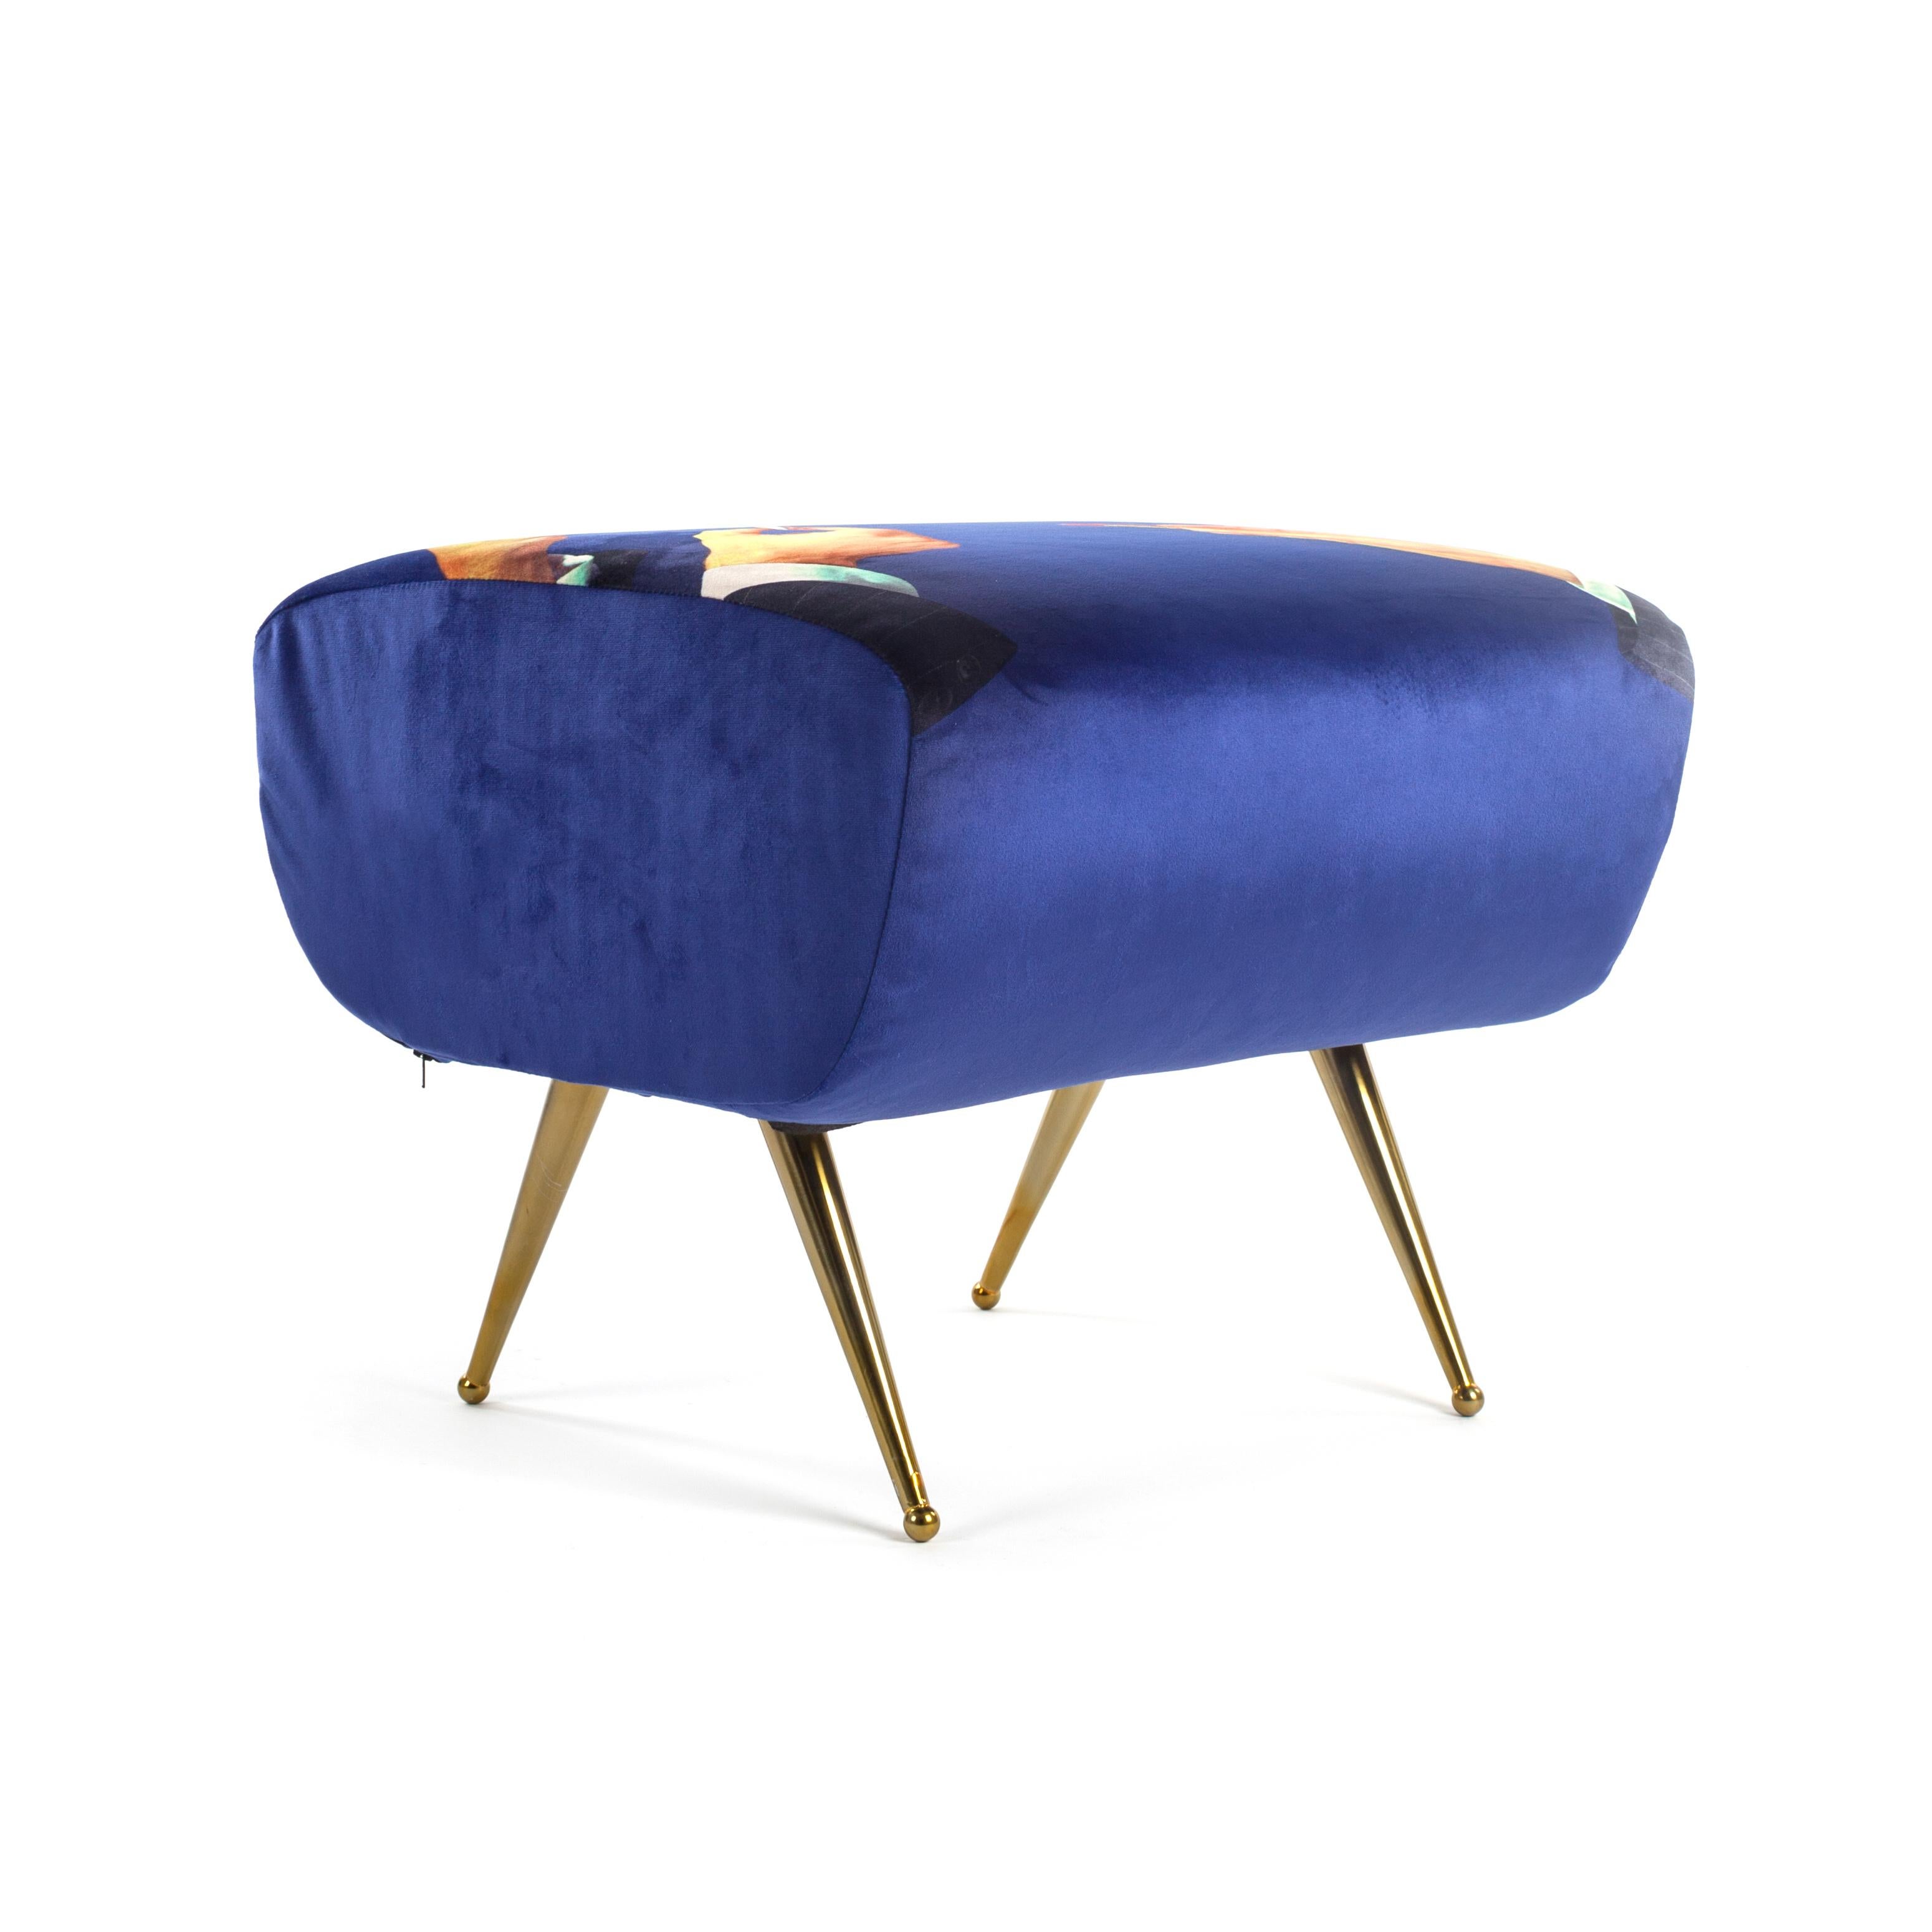 Pouf by Toiletpaper.

- Size: cm 51 × 46, H 42
- Material: Fabrics in polyester, frame in wood with polyurethane padding, metal. 
          